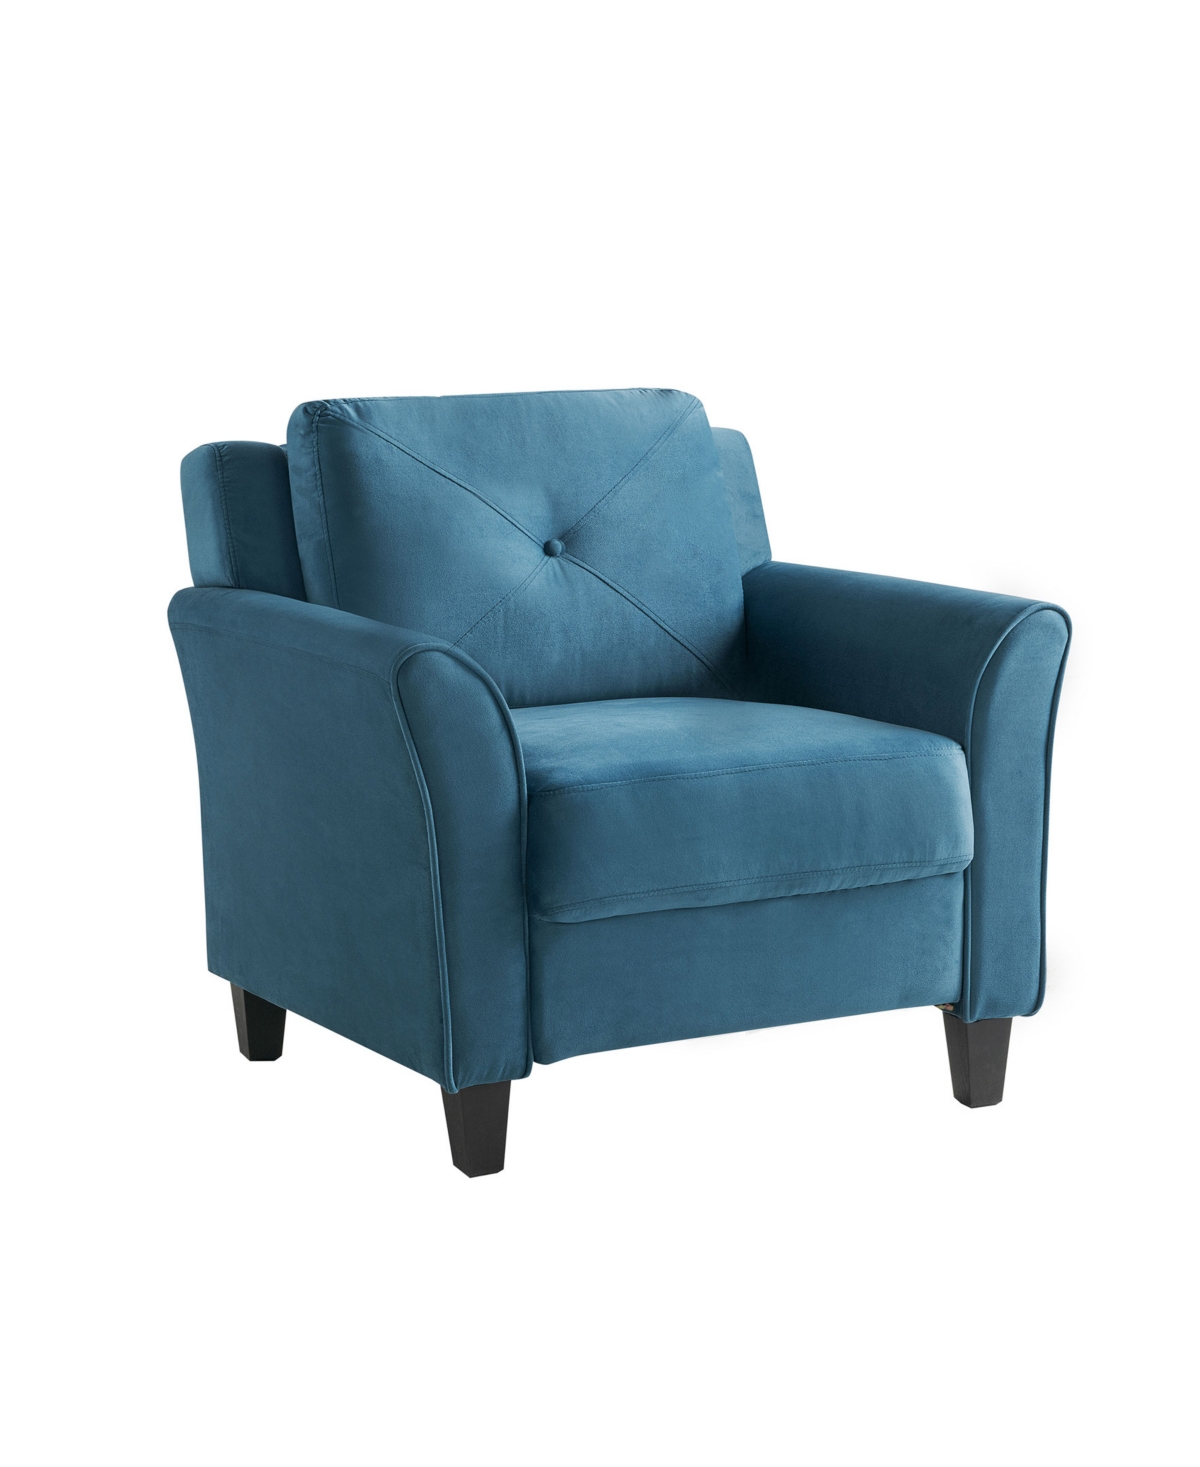 Shop Lifestyle Solutions 33.9" W Polyester Harvard Chair With Curved Arms In Blue